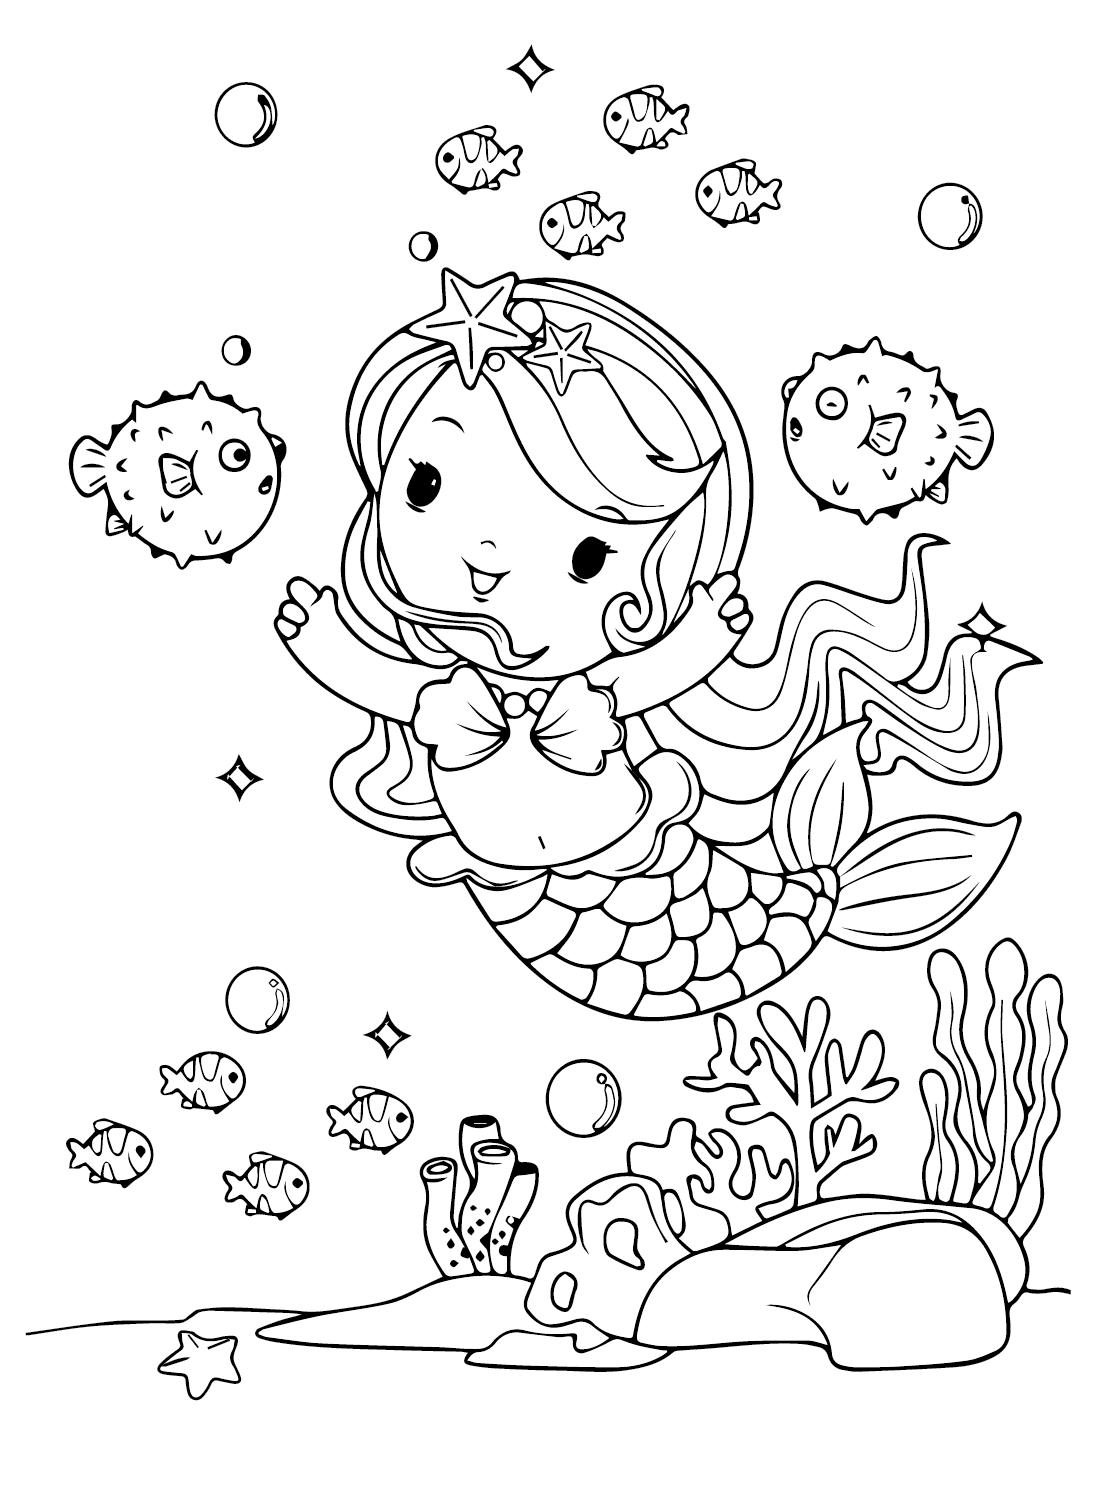 Mermaid and Puffer Coloring Page - Free Printable Coloring Pages